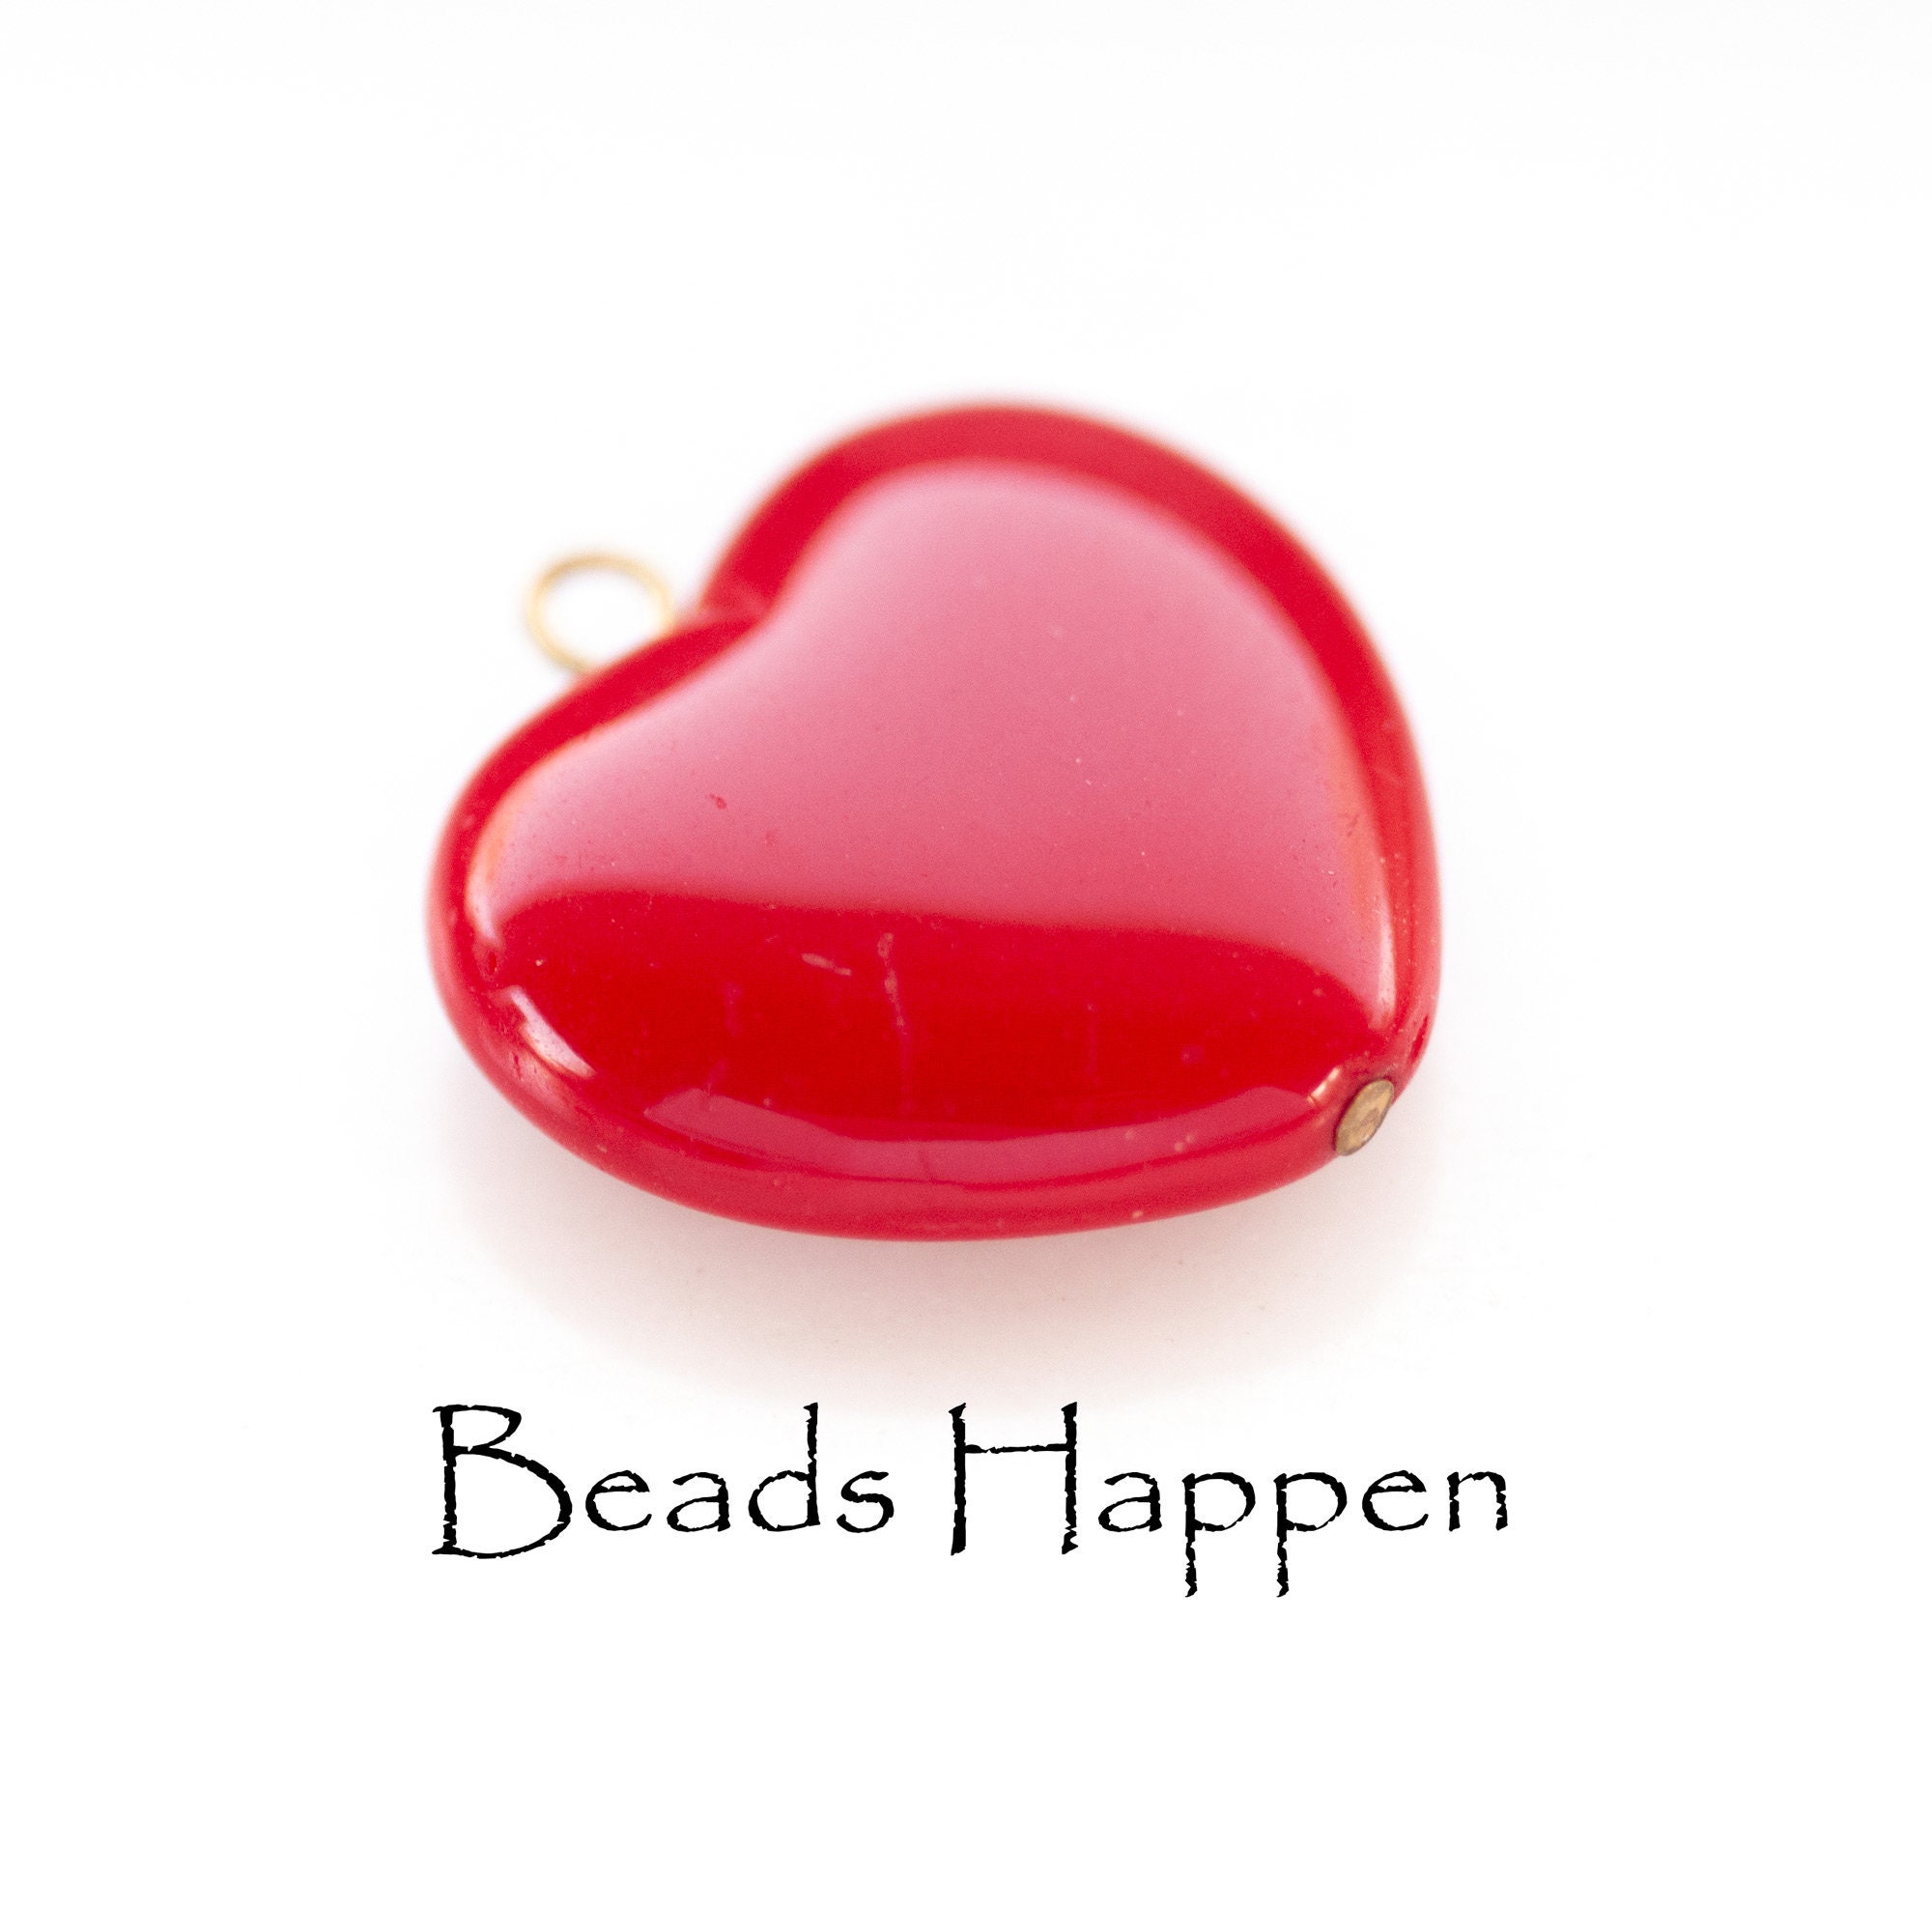 5 Red Enamel Heart Spacer 8mm Beads Silver Tone BD924 